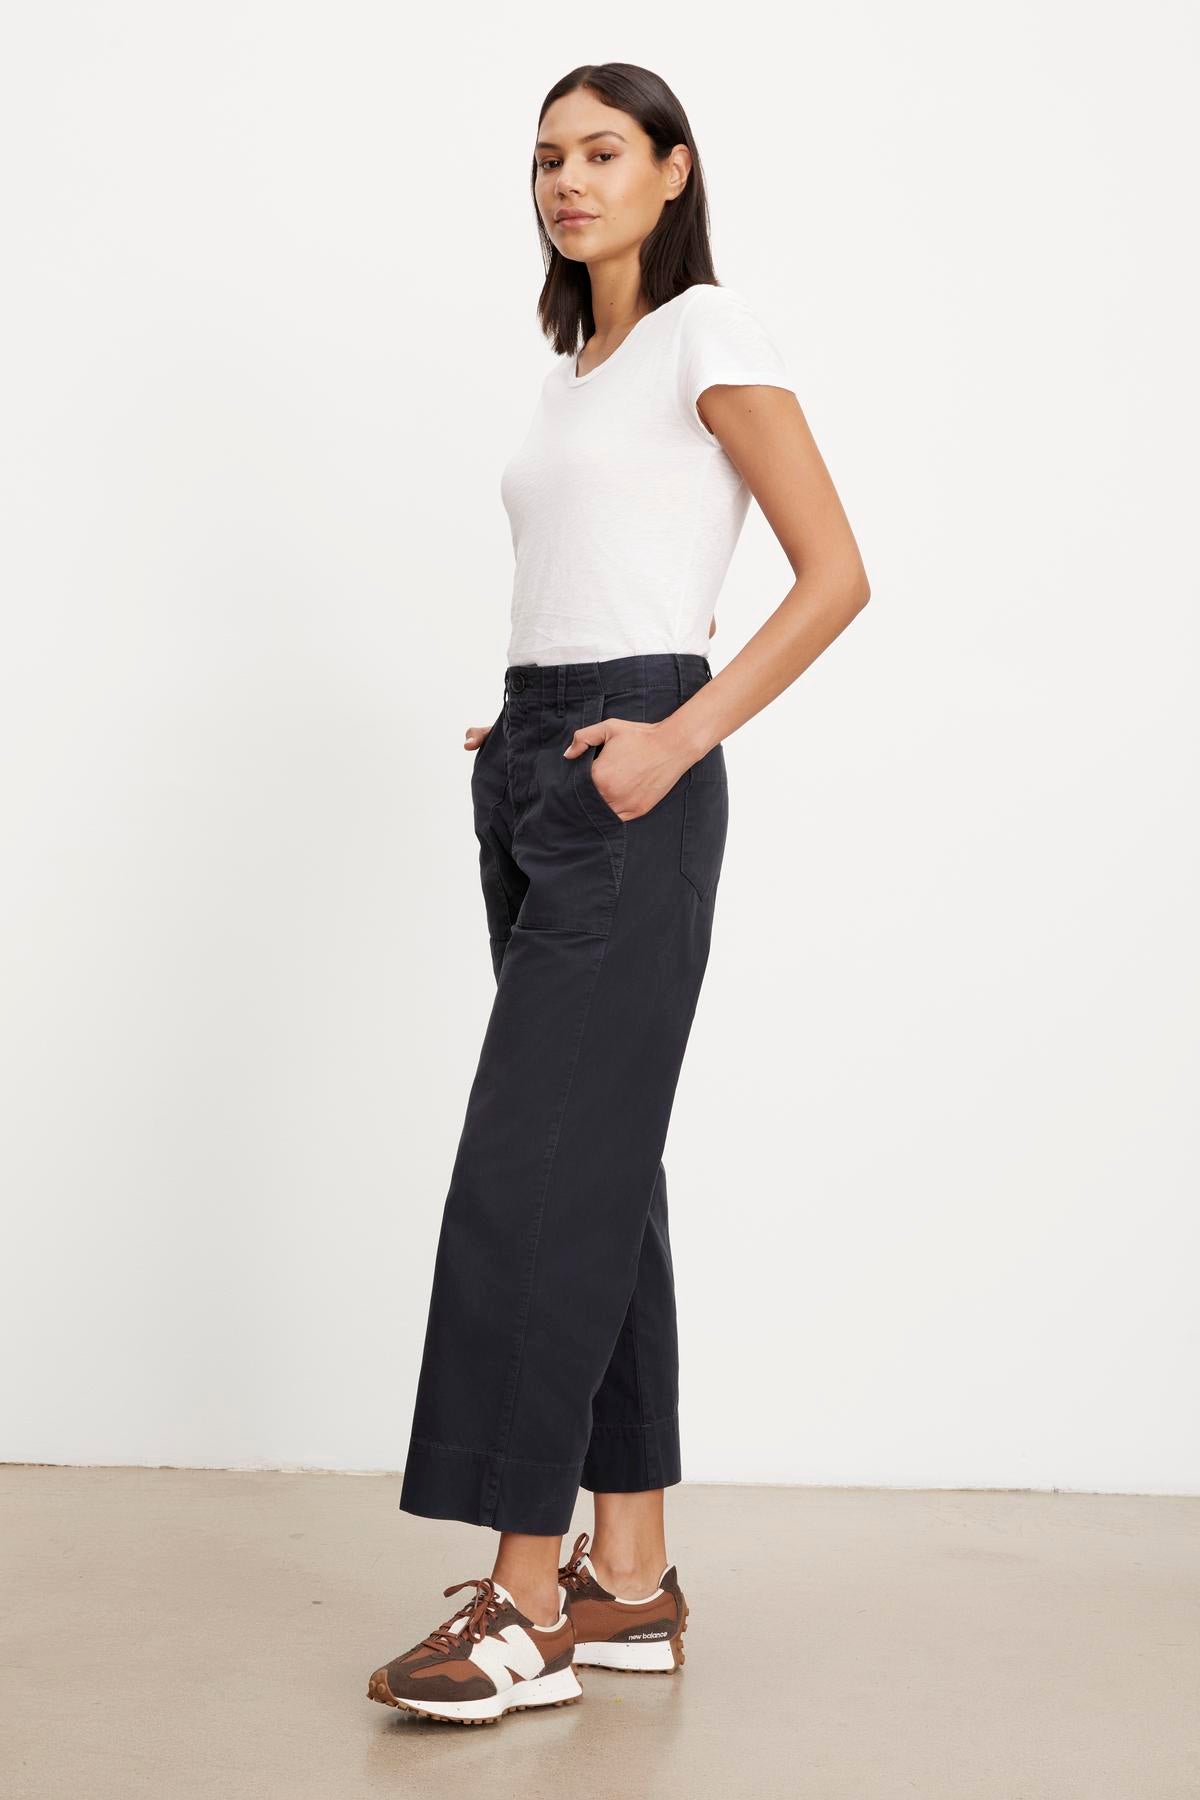   A woman stands casually in a white top, Velvet by Graham & Spencer's MYA cotton canvas pants with a utility silhouette, and brown shoes against a neutral background. 